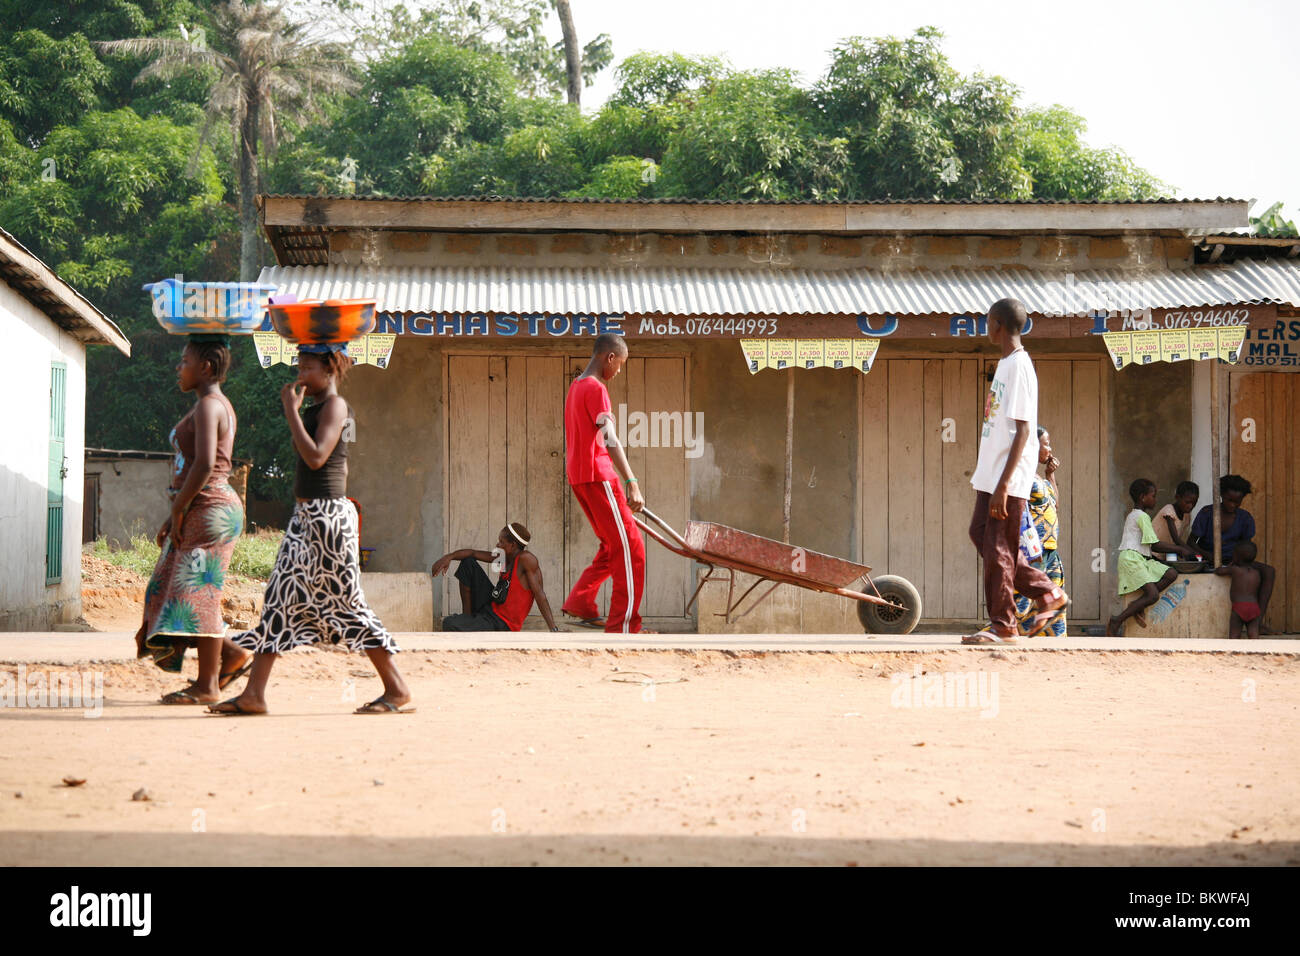 Women going to and from market with produce, Rotifunk-Lungi village, Sierra Leone, West Africa Stock Photo